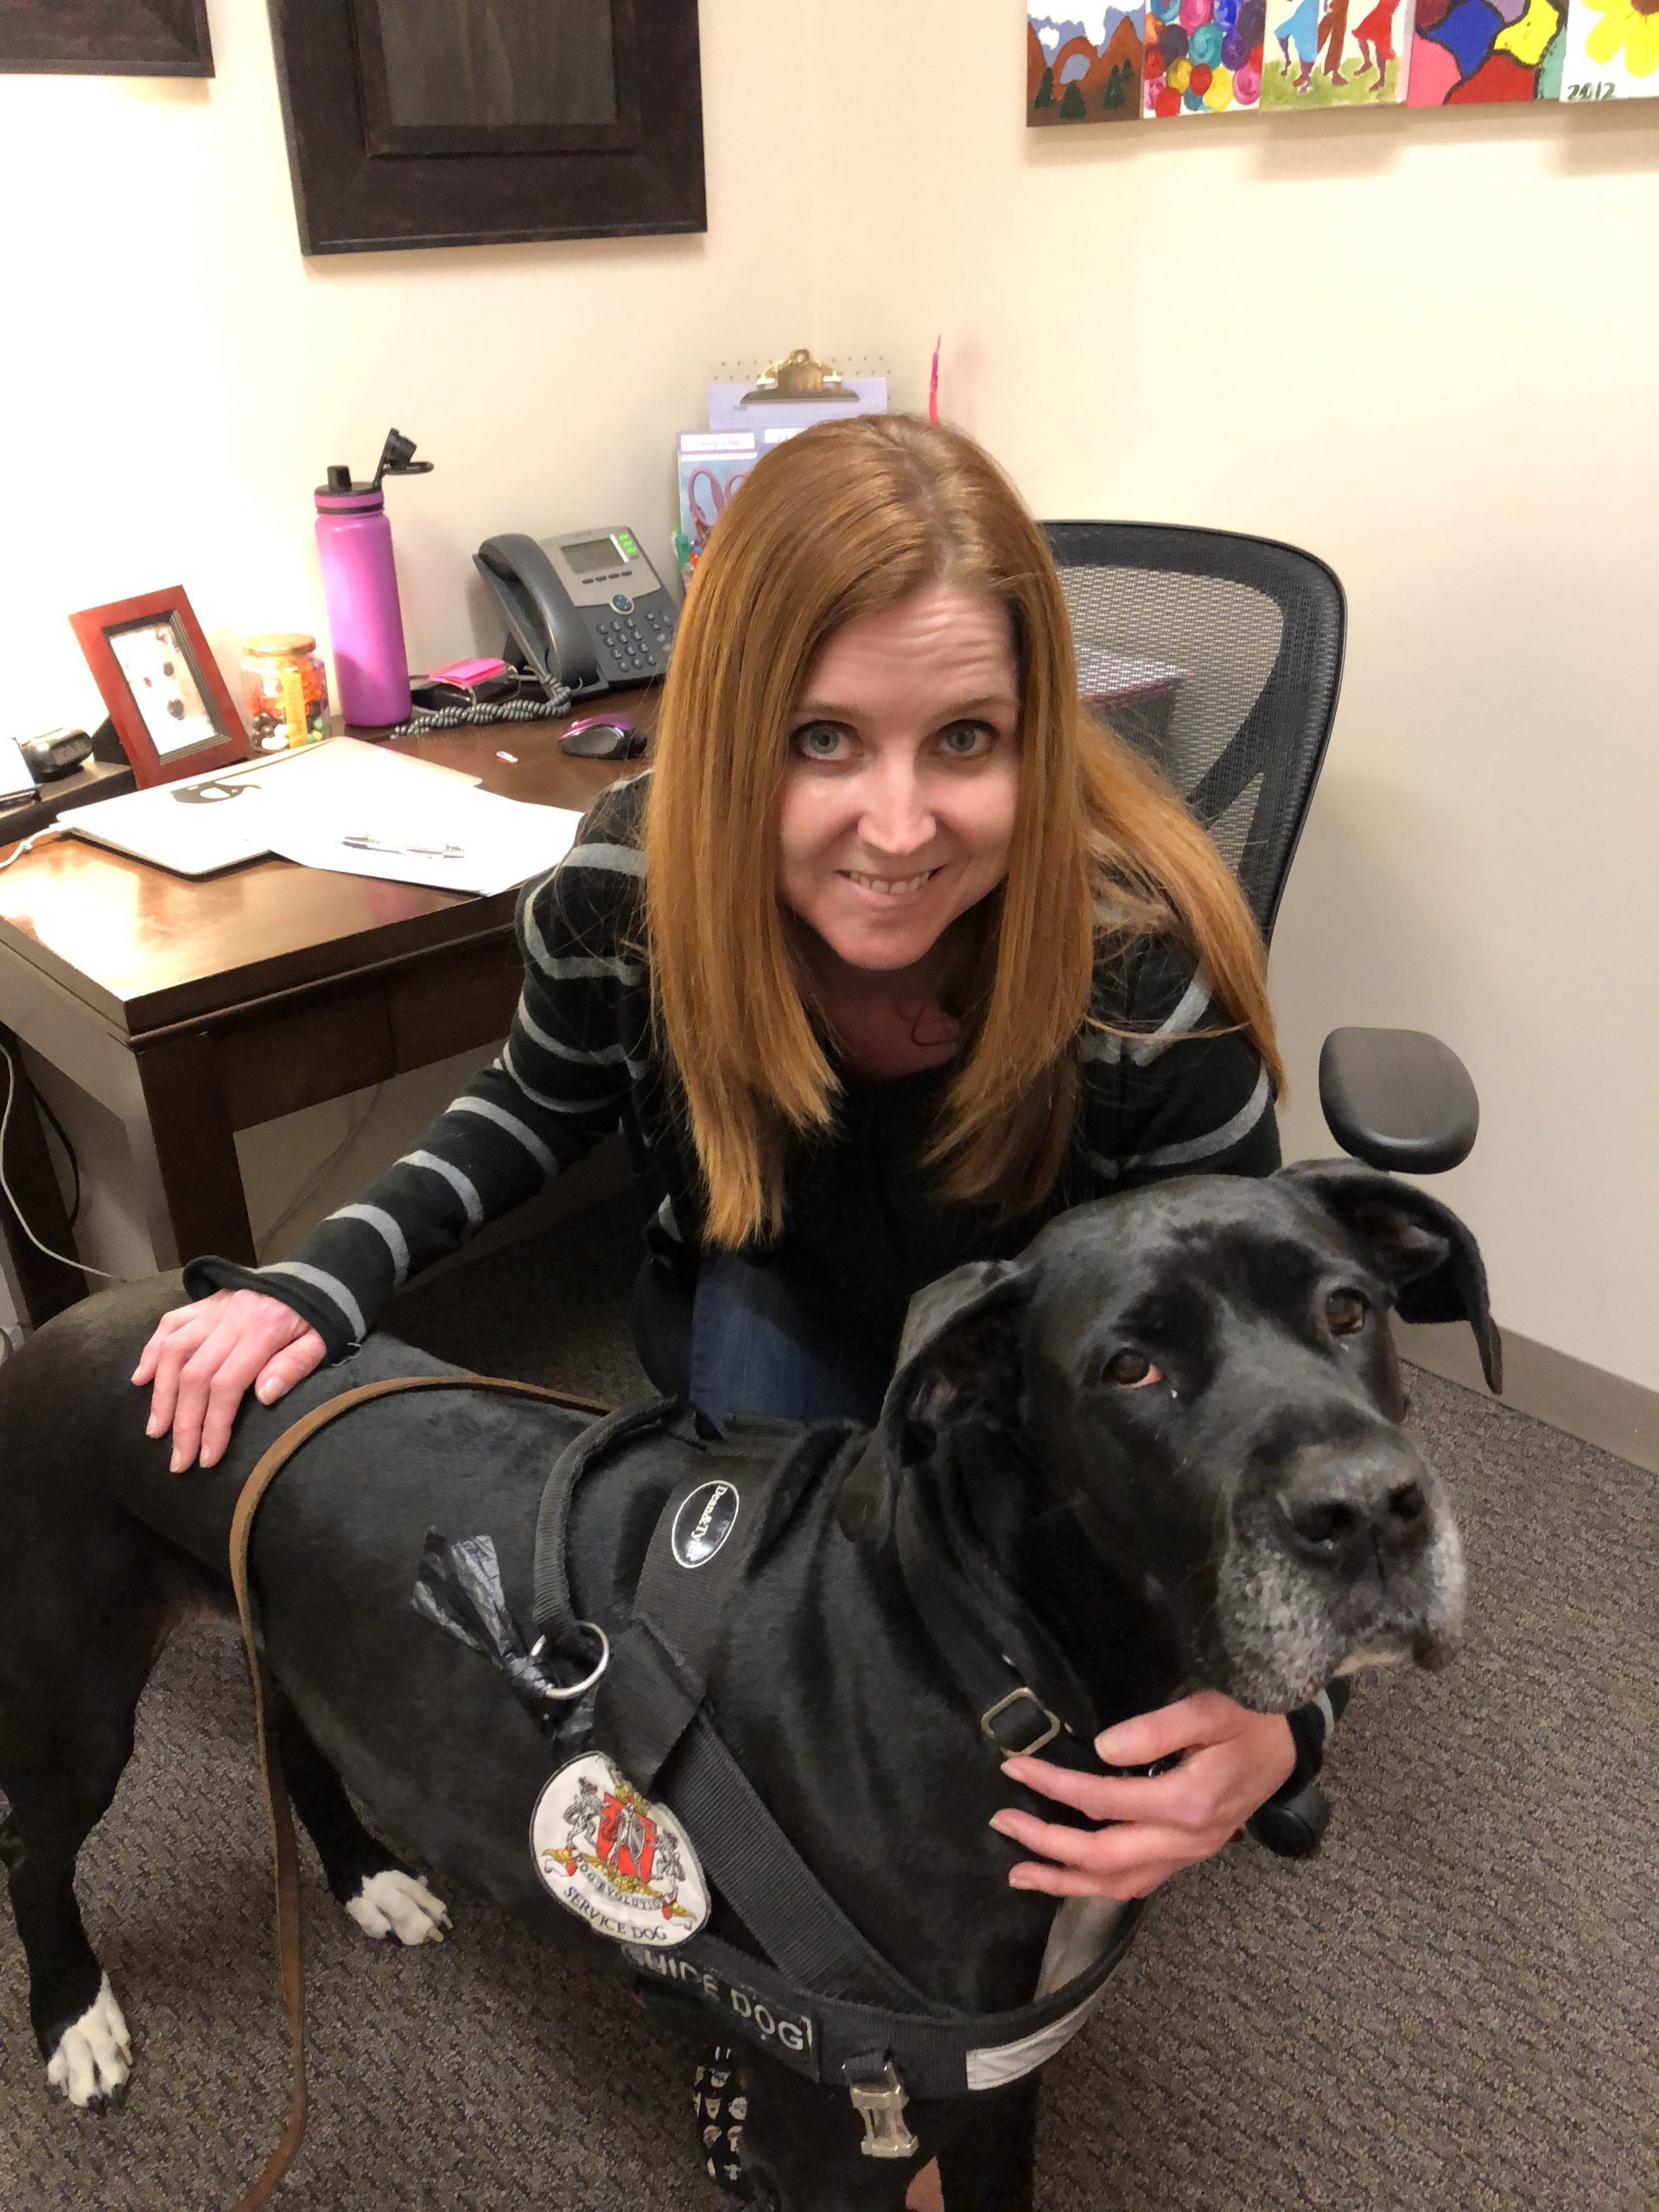 Interview with a Parkinsonâs Service Dog Trainer